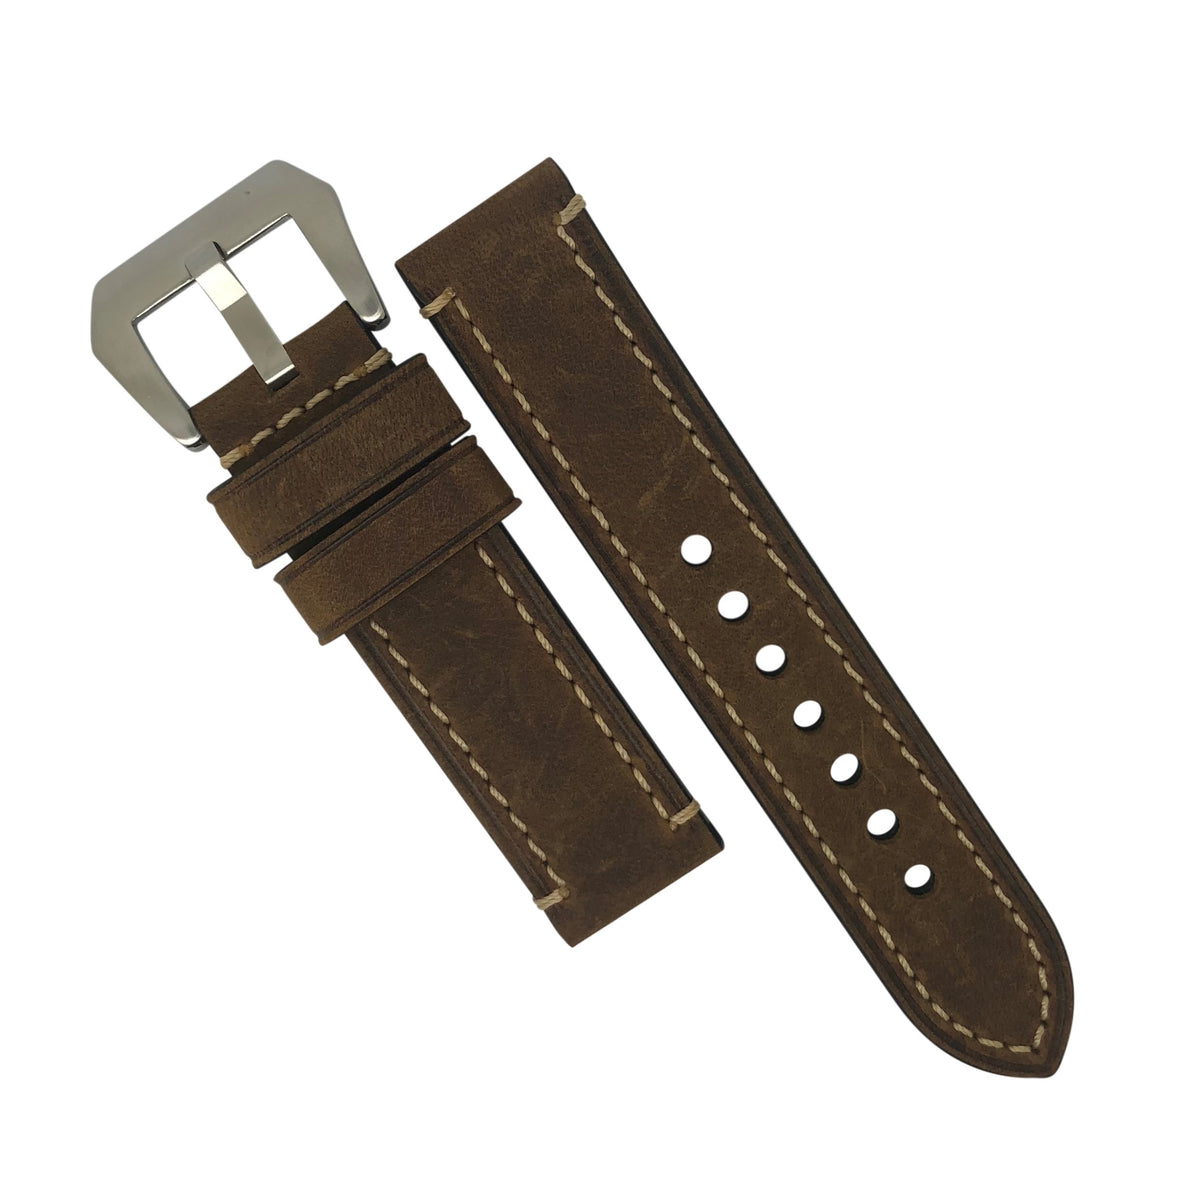 M1 Vintage Leather Watch Strap in Brown (20mm) - Nomad watch Works